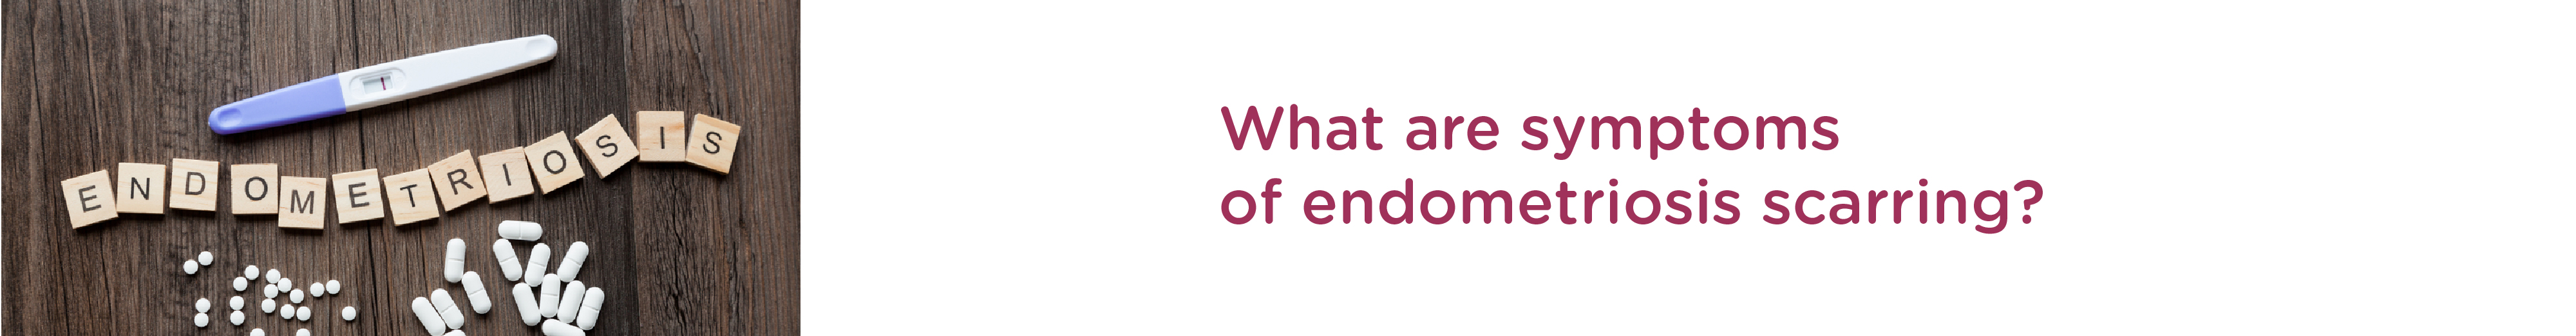 What are Symptoms of Endometriosis Scarring?